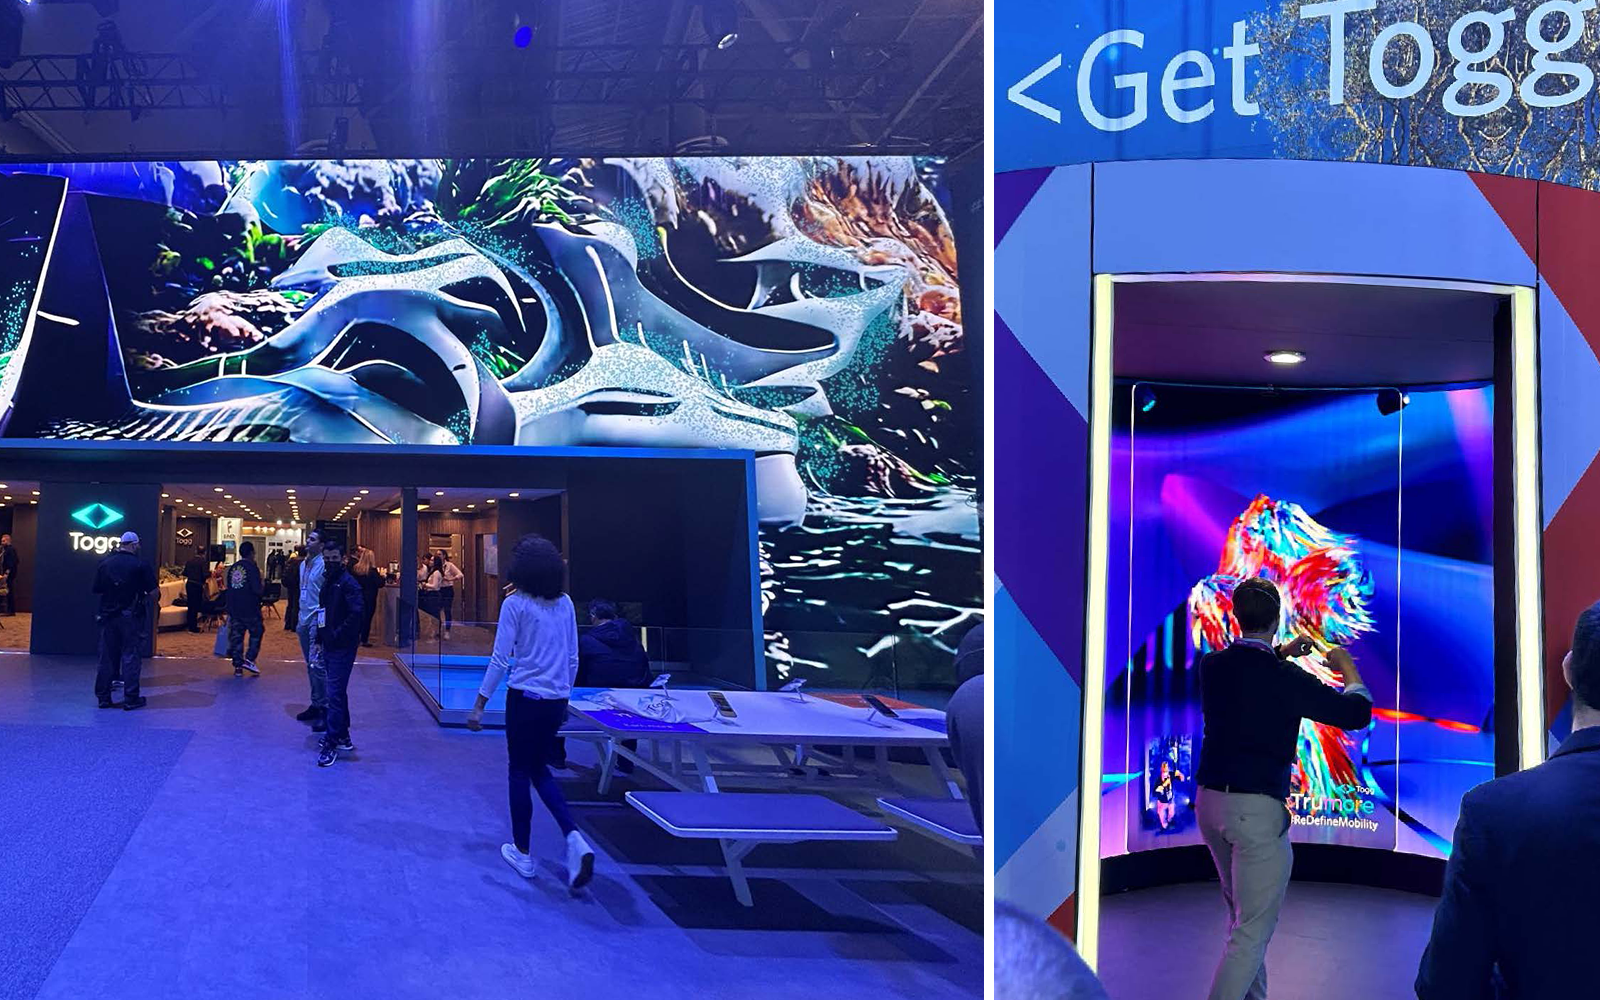 A video wall and digital twin experience at the Togg exhibit